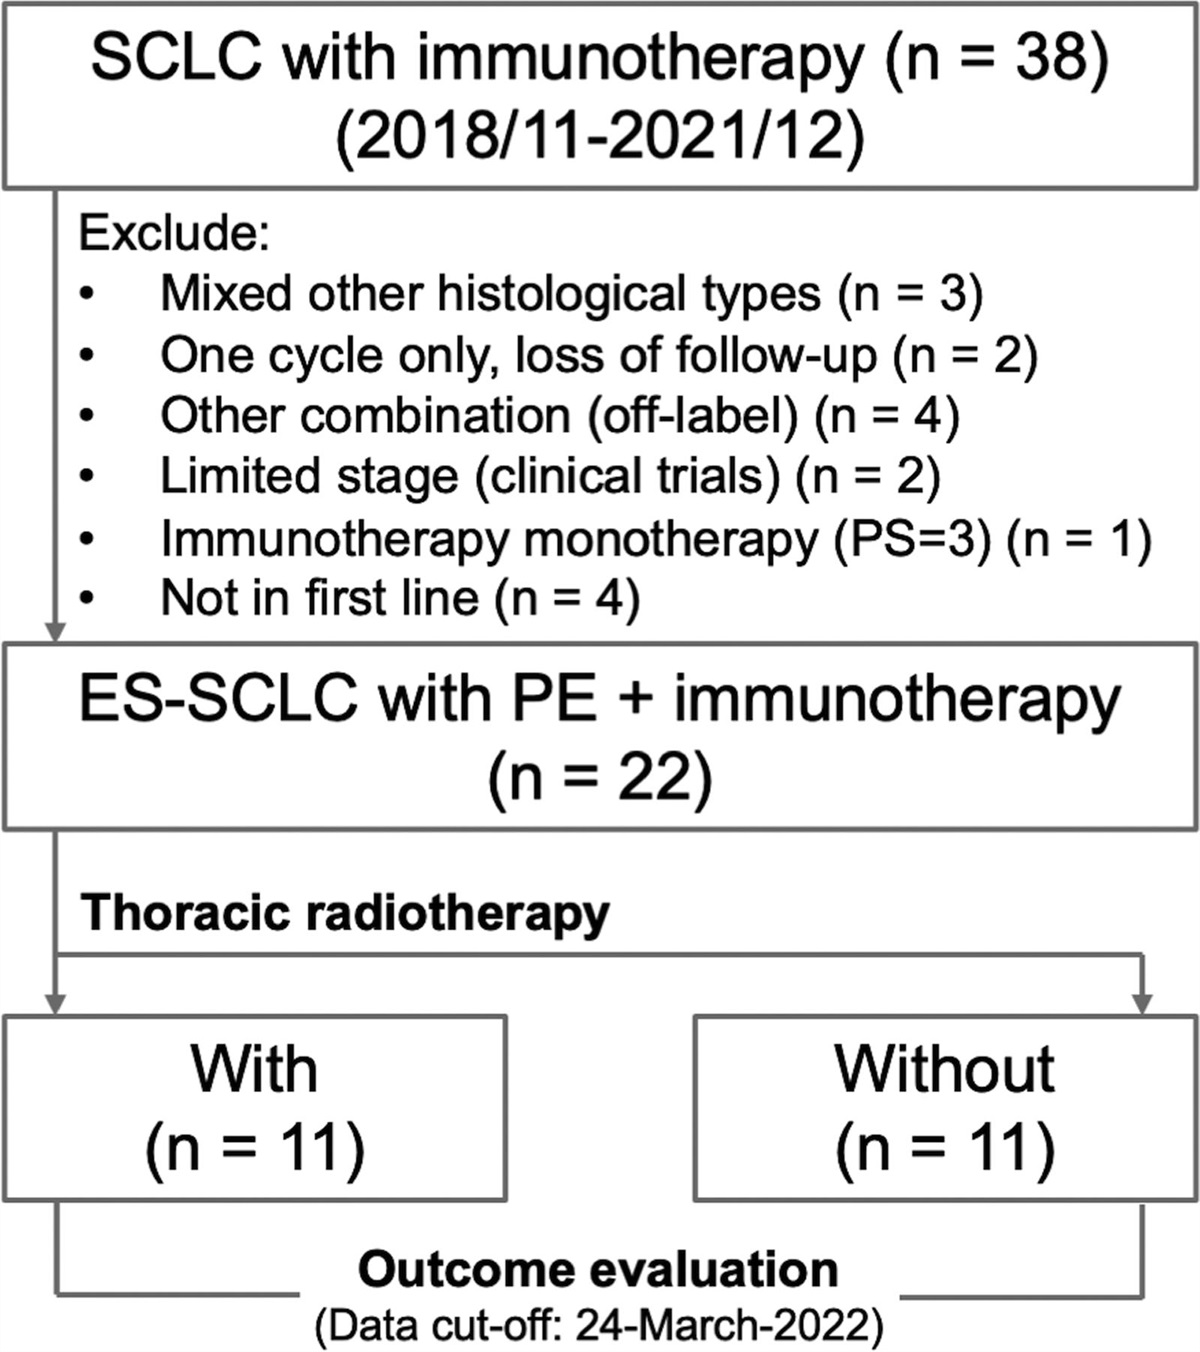 Thoracic radiotherapy may improve the outcome of extensive stage small cell lung carcinoma patients treated with first-line immunotherapy plus chemotherapy